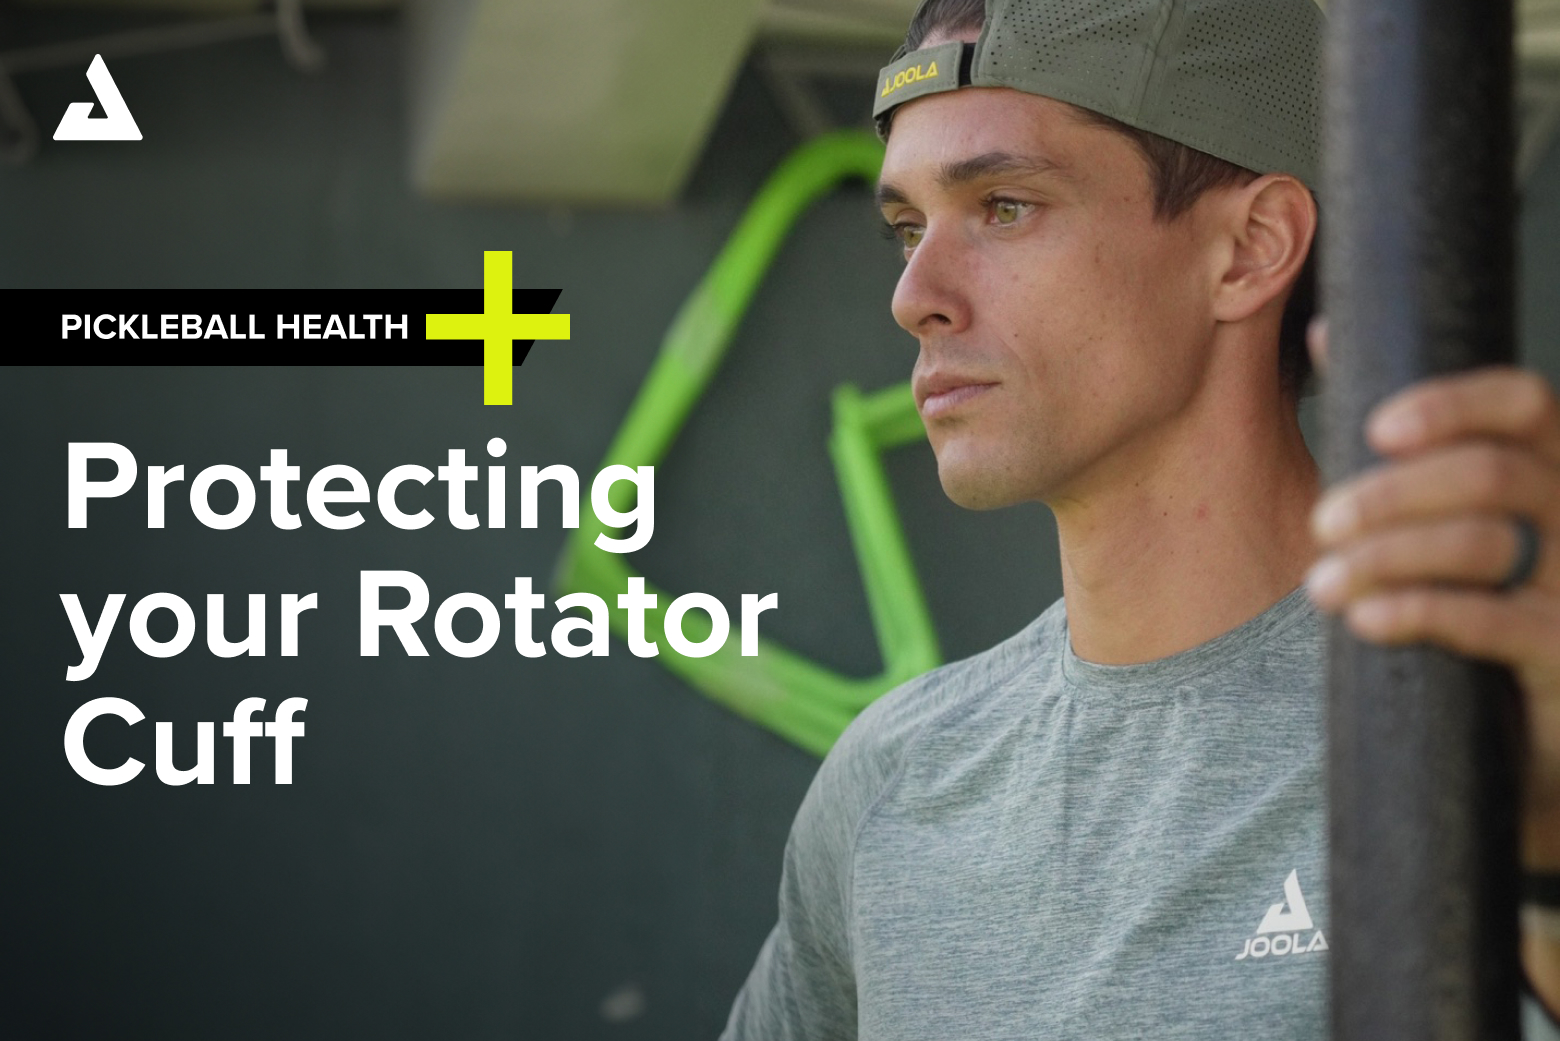 Pickleball Health: The importance of the Rotator Cuff